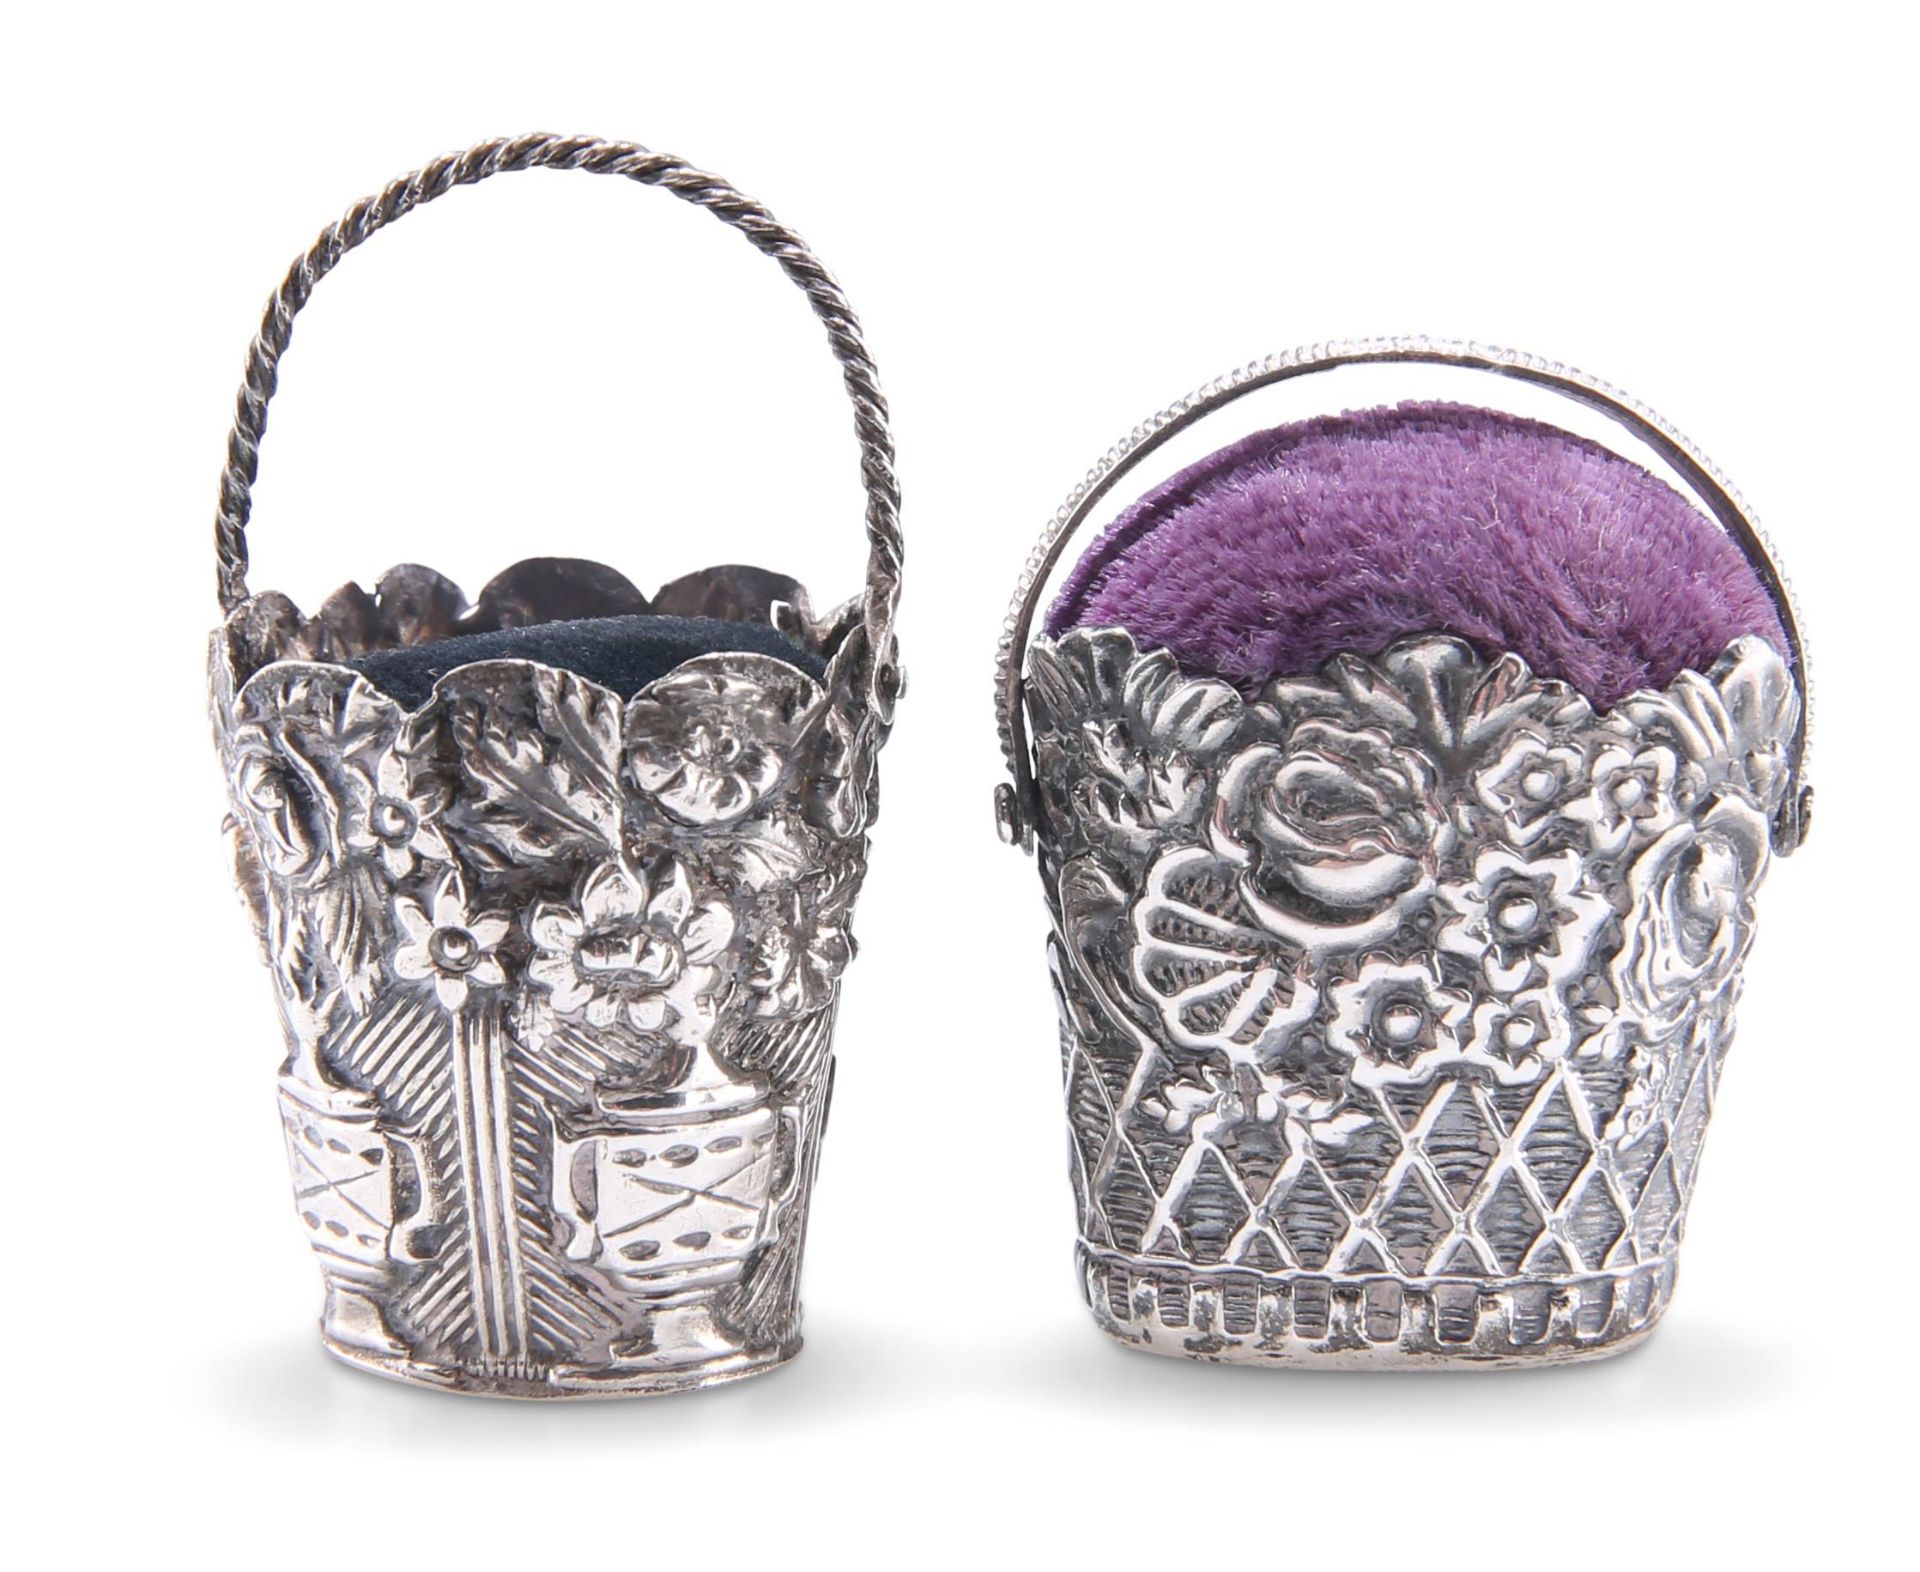 TWO EARLY 19TH CENTURY SILVER NOVELTY PIN CUSHIONS